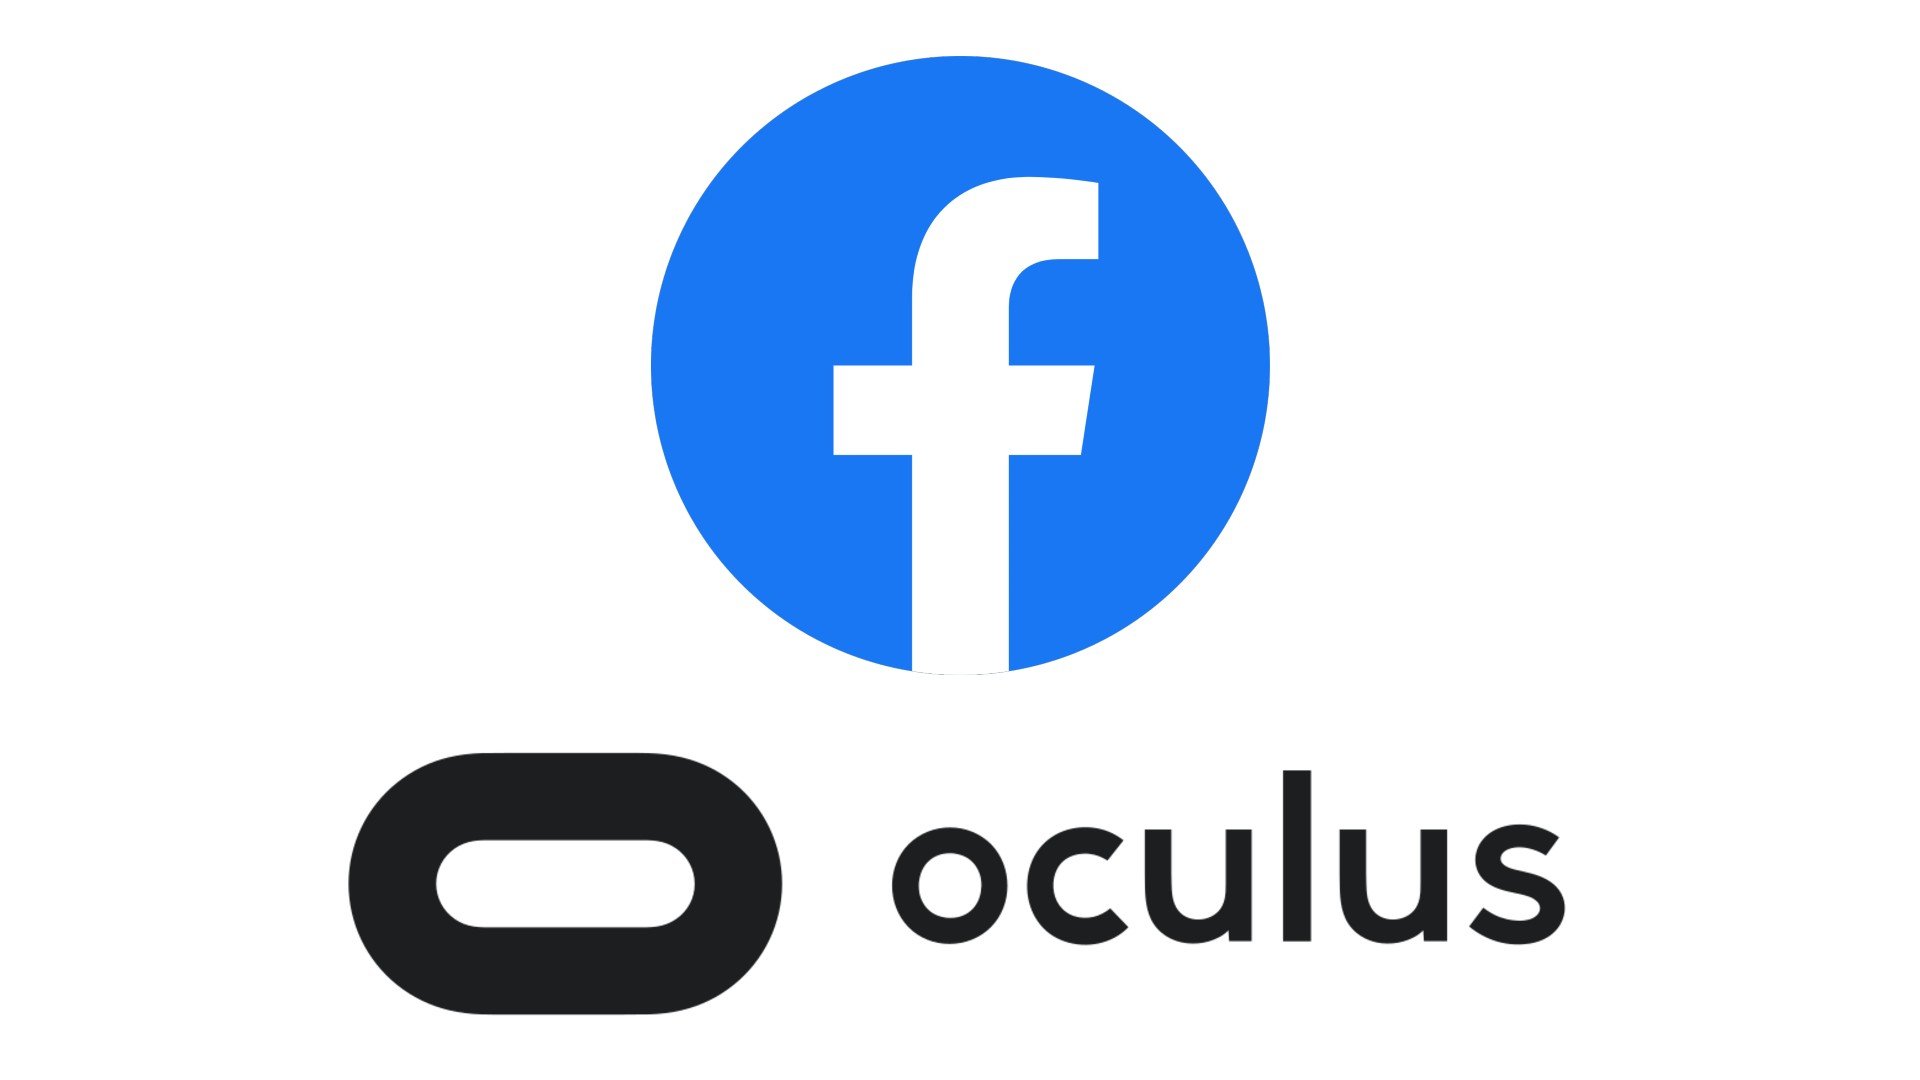 https://www.androidcentral.com/sites/androidcentral.com/files/styles/large/public/article_images/2020/08/facebook-oculus-logos.jpg.jpg